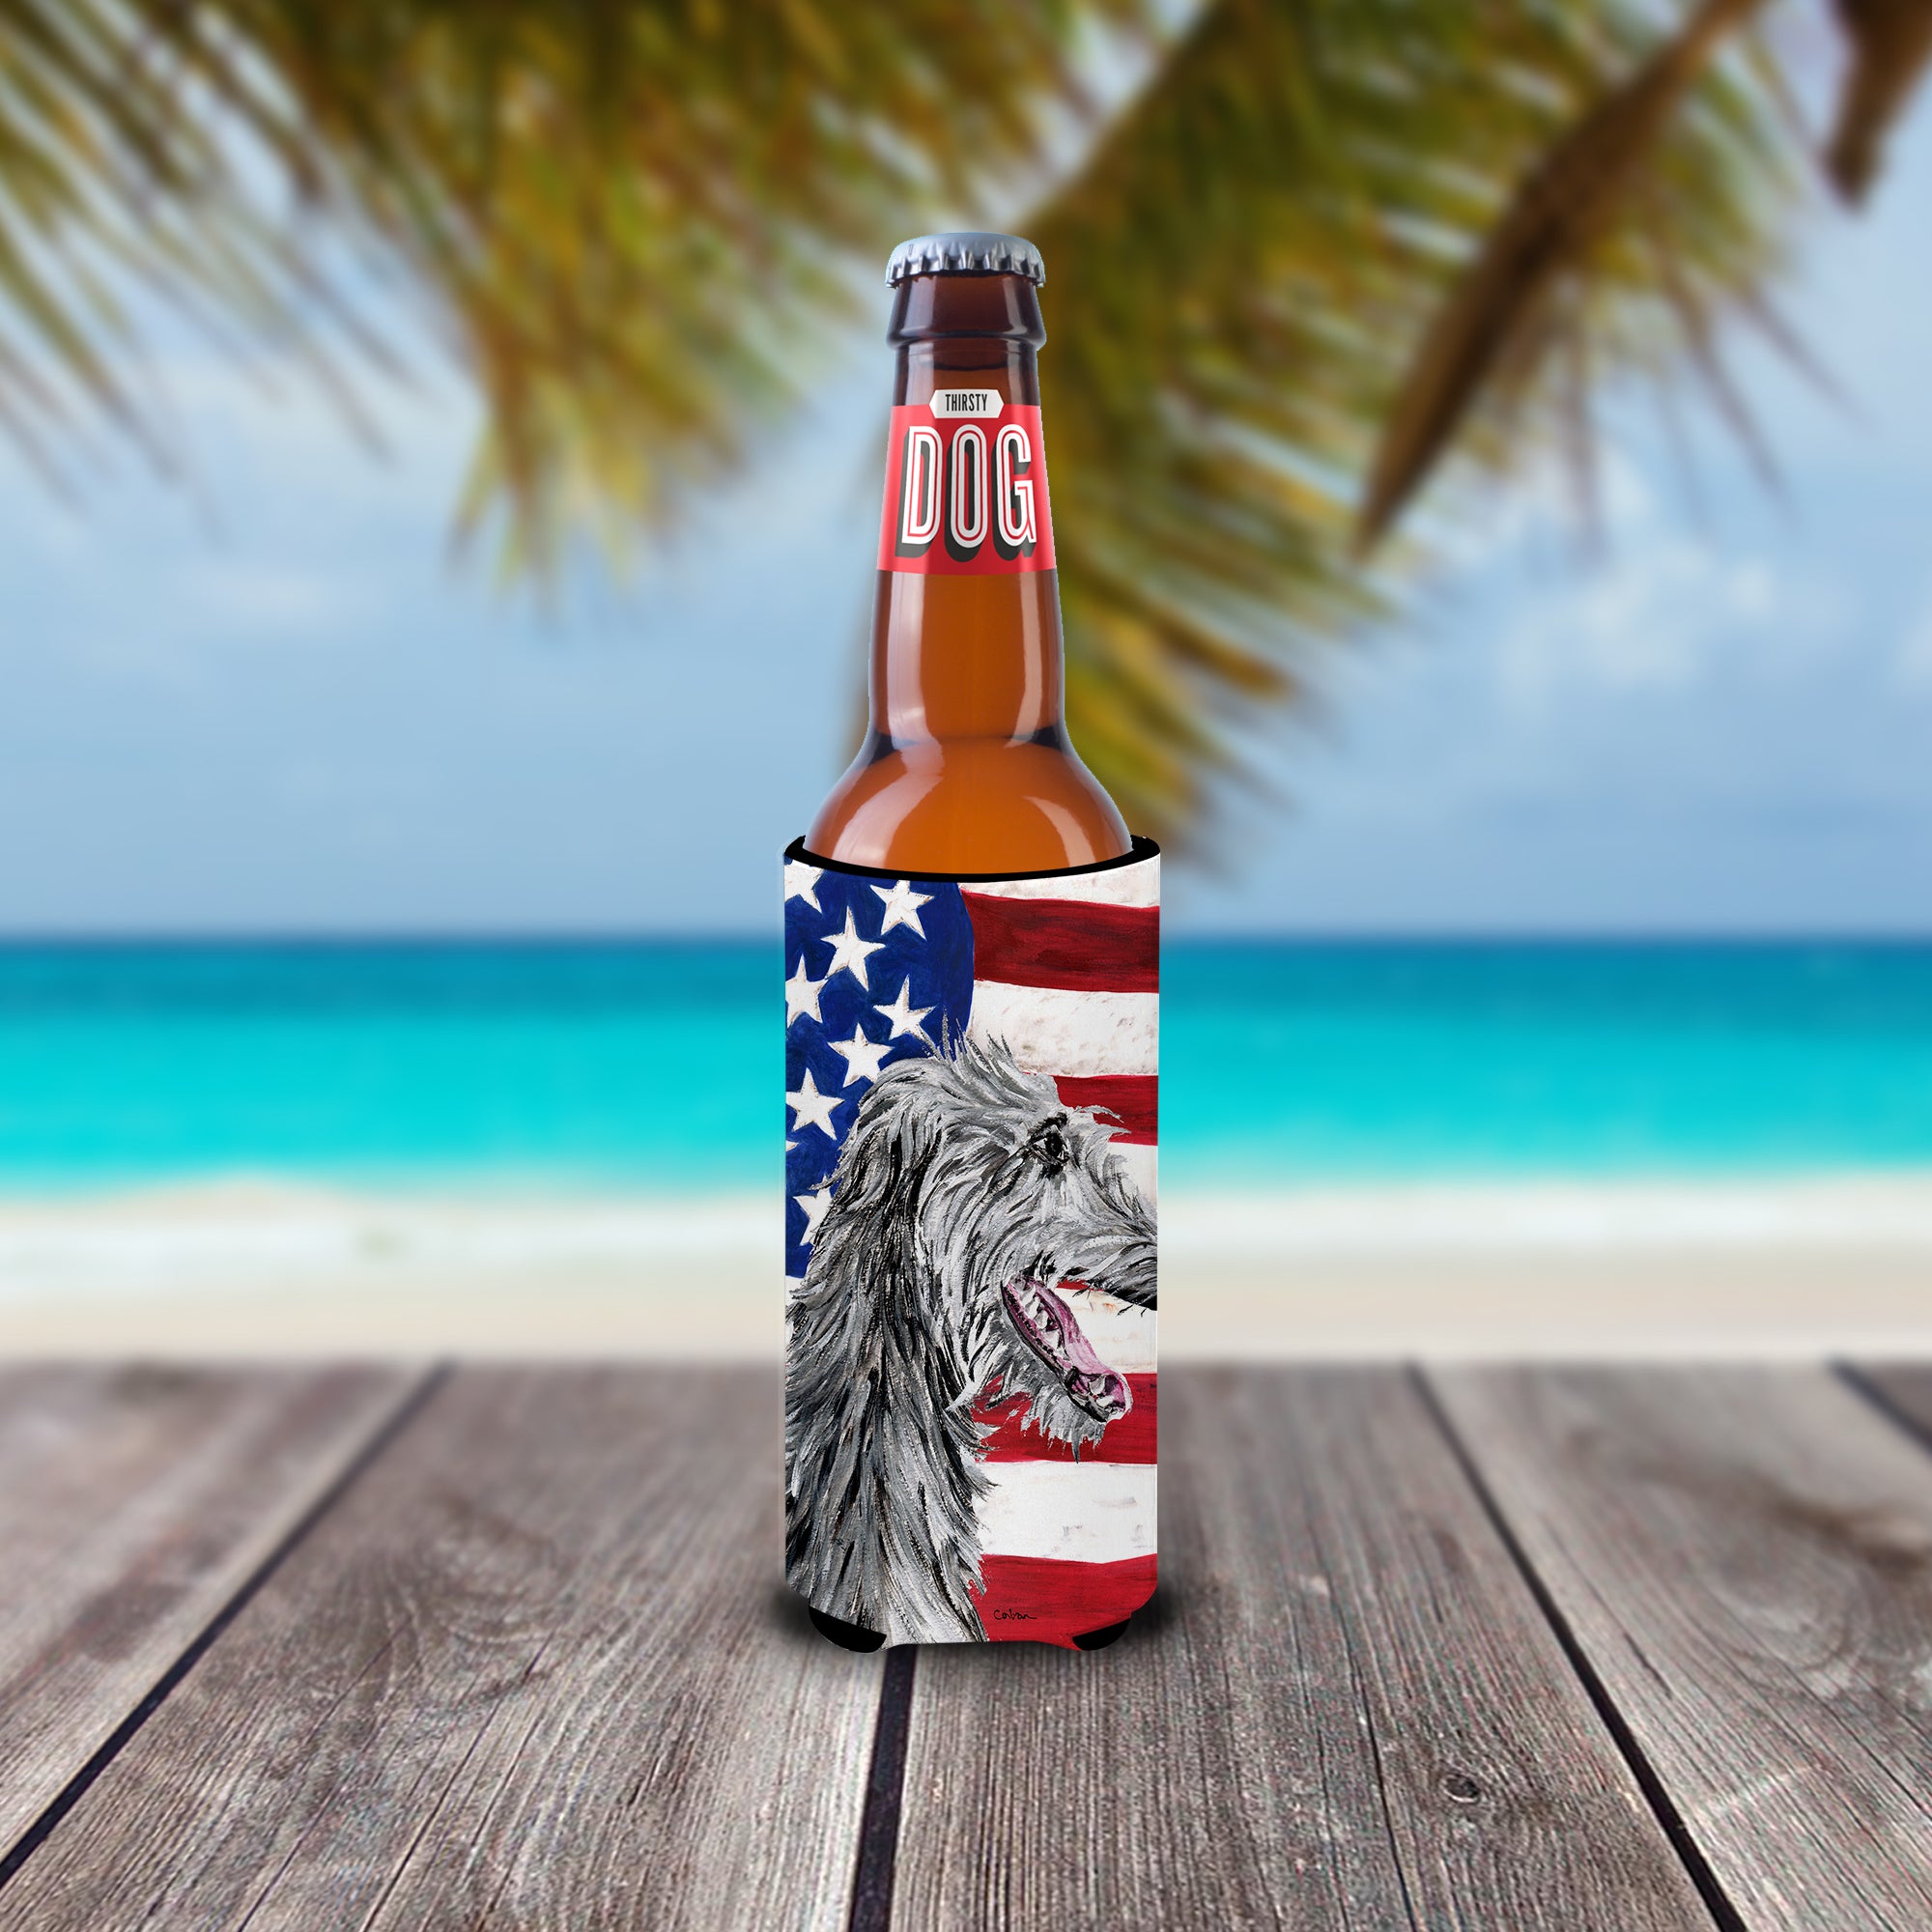 Scottish Deerhound with American Flag USA Ultra Beverage Insulators for slim cans SC9645MUK.